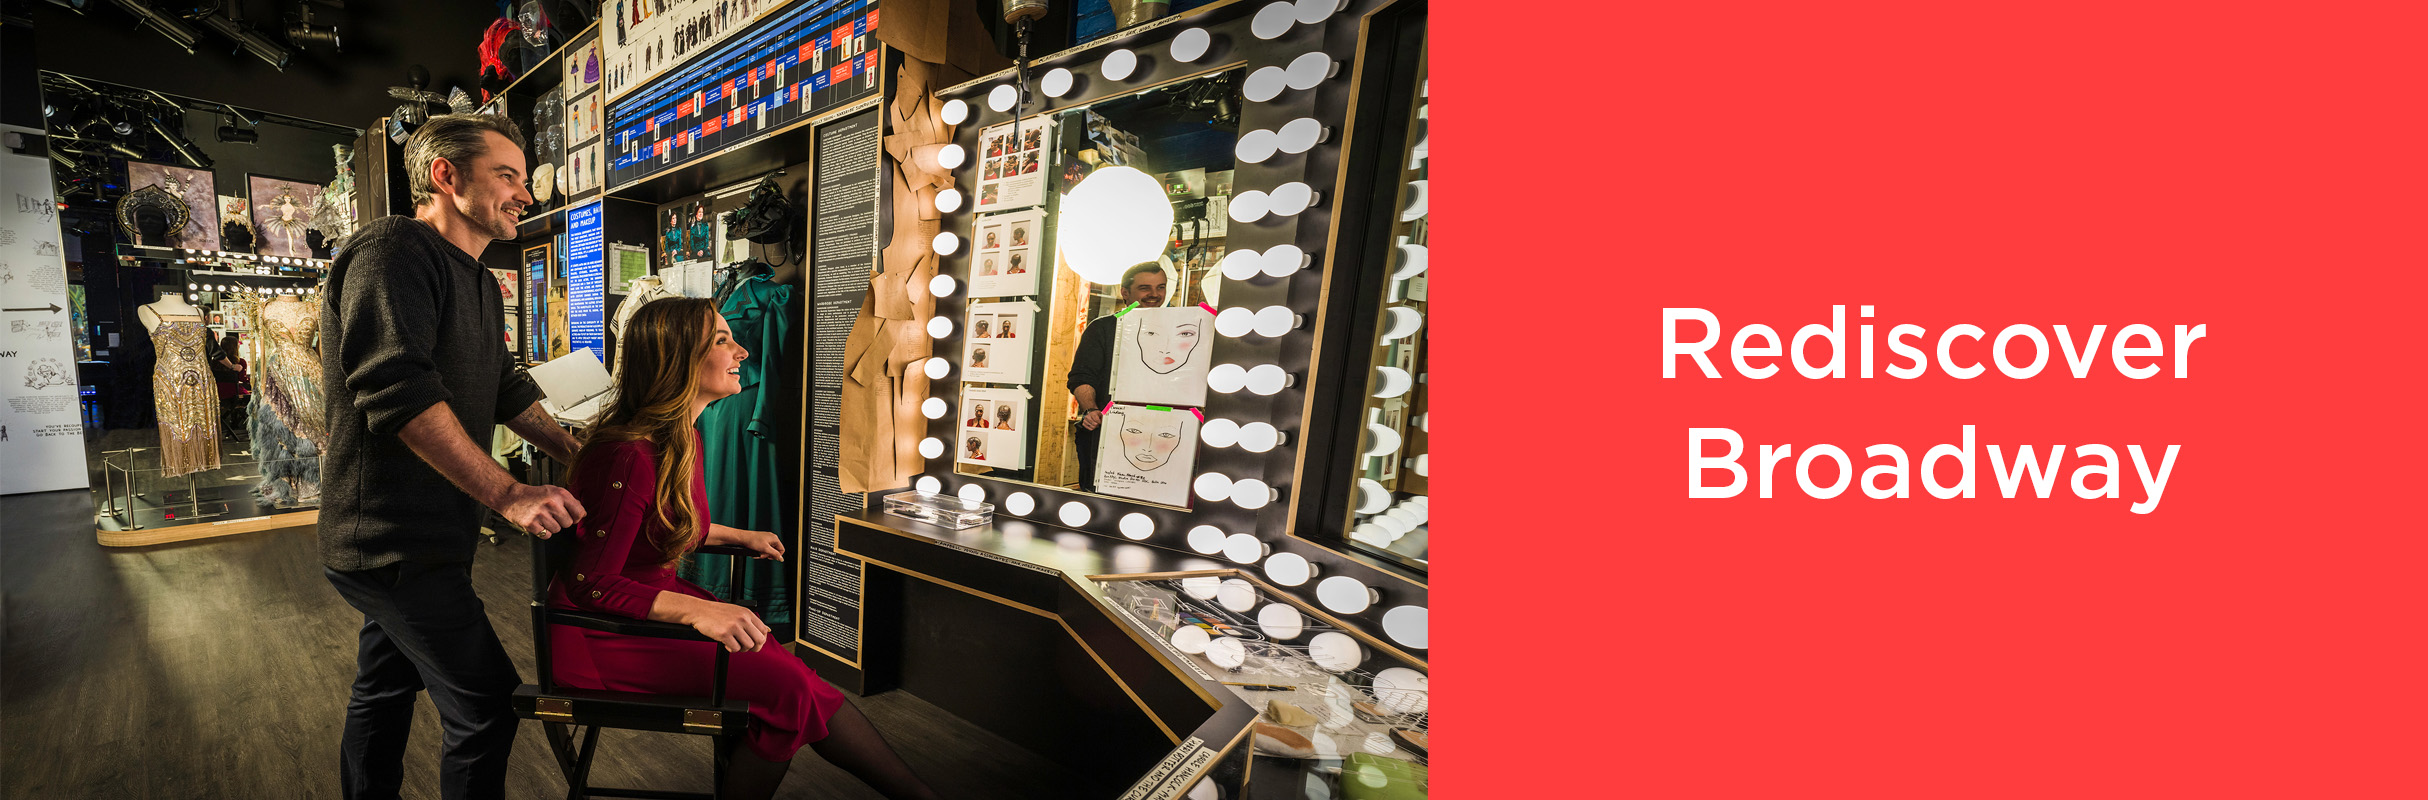 Rediscover Broadway with image of guests sitting in a mock dress room exhibit at the museum.